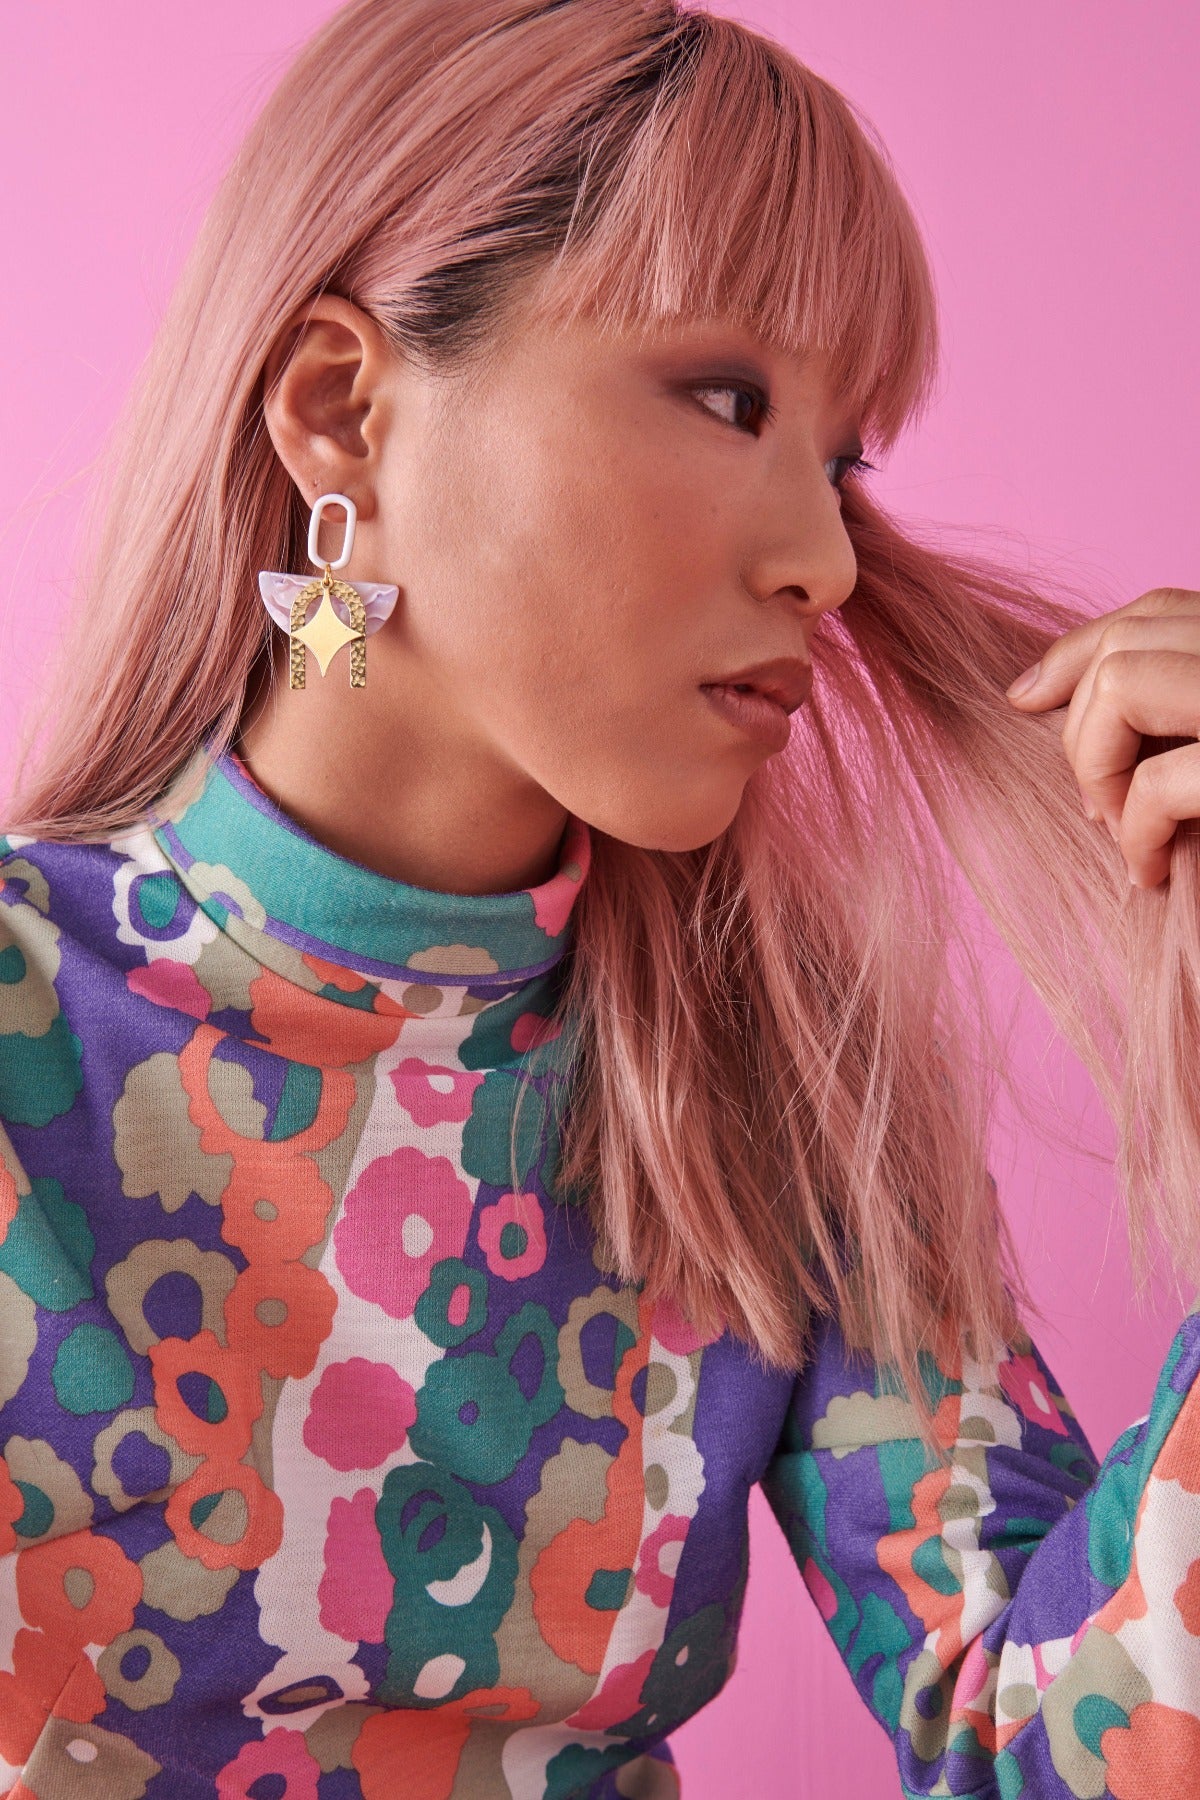 A pink haired lady shows a side view of the white Beatnik earring. She wears a graphic floral dress and is seated against a pink background. 